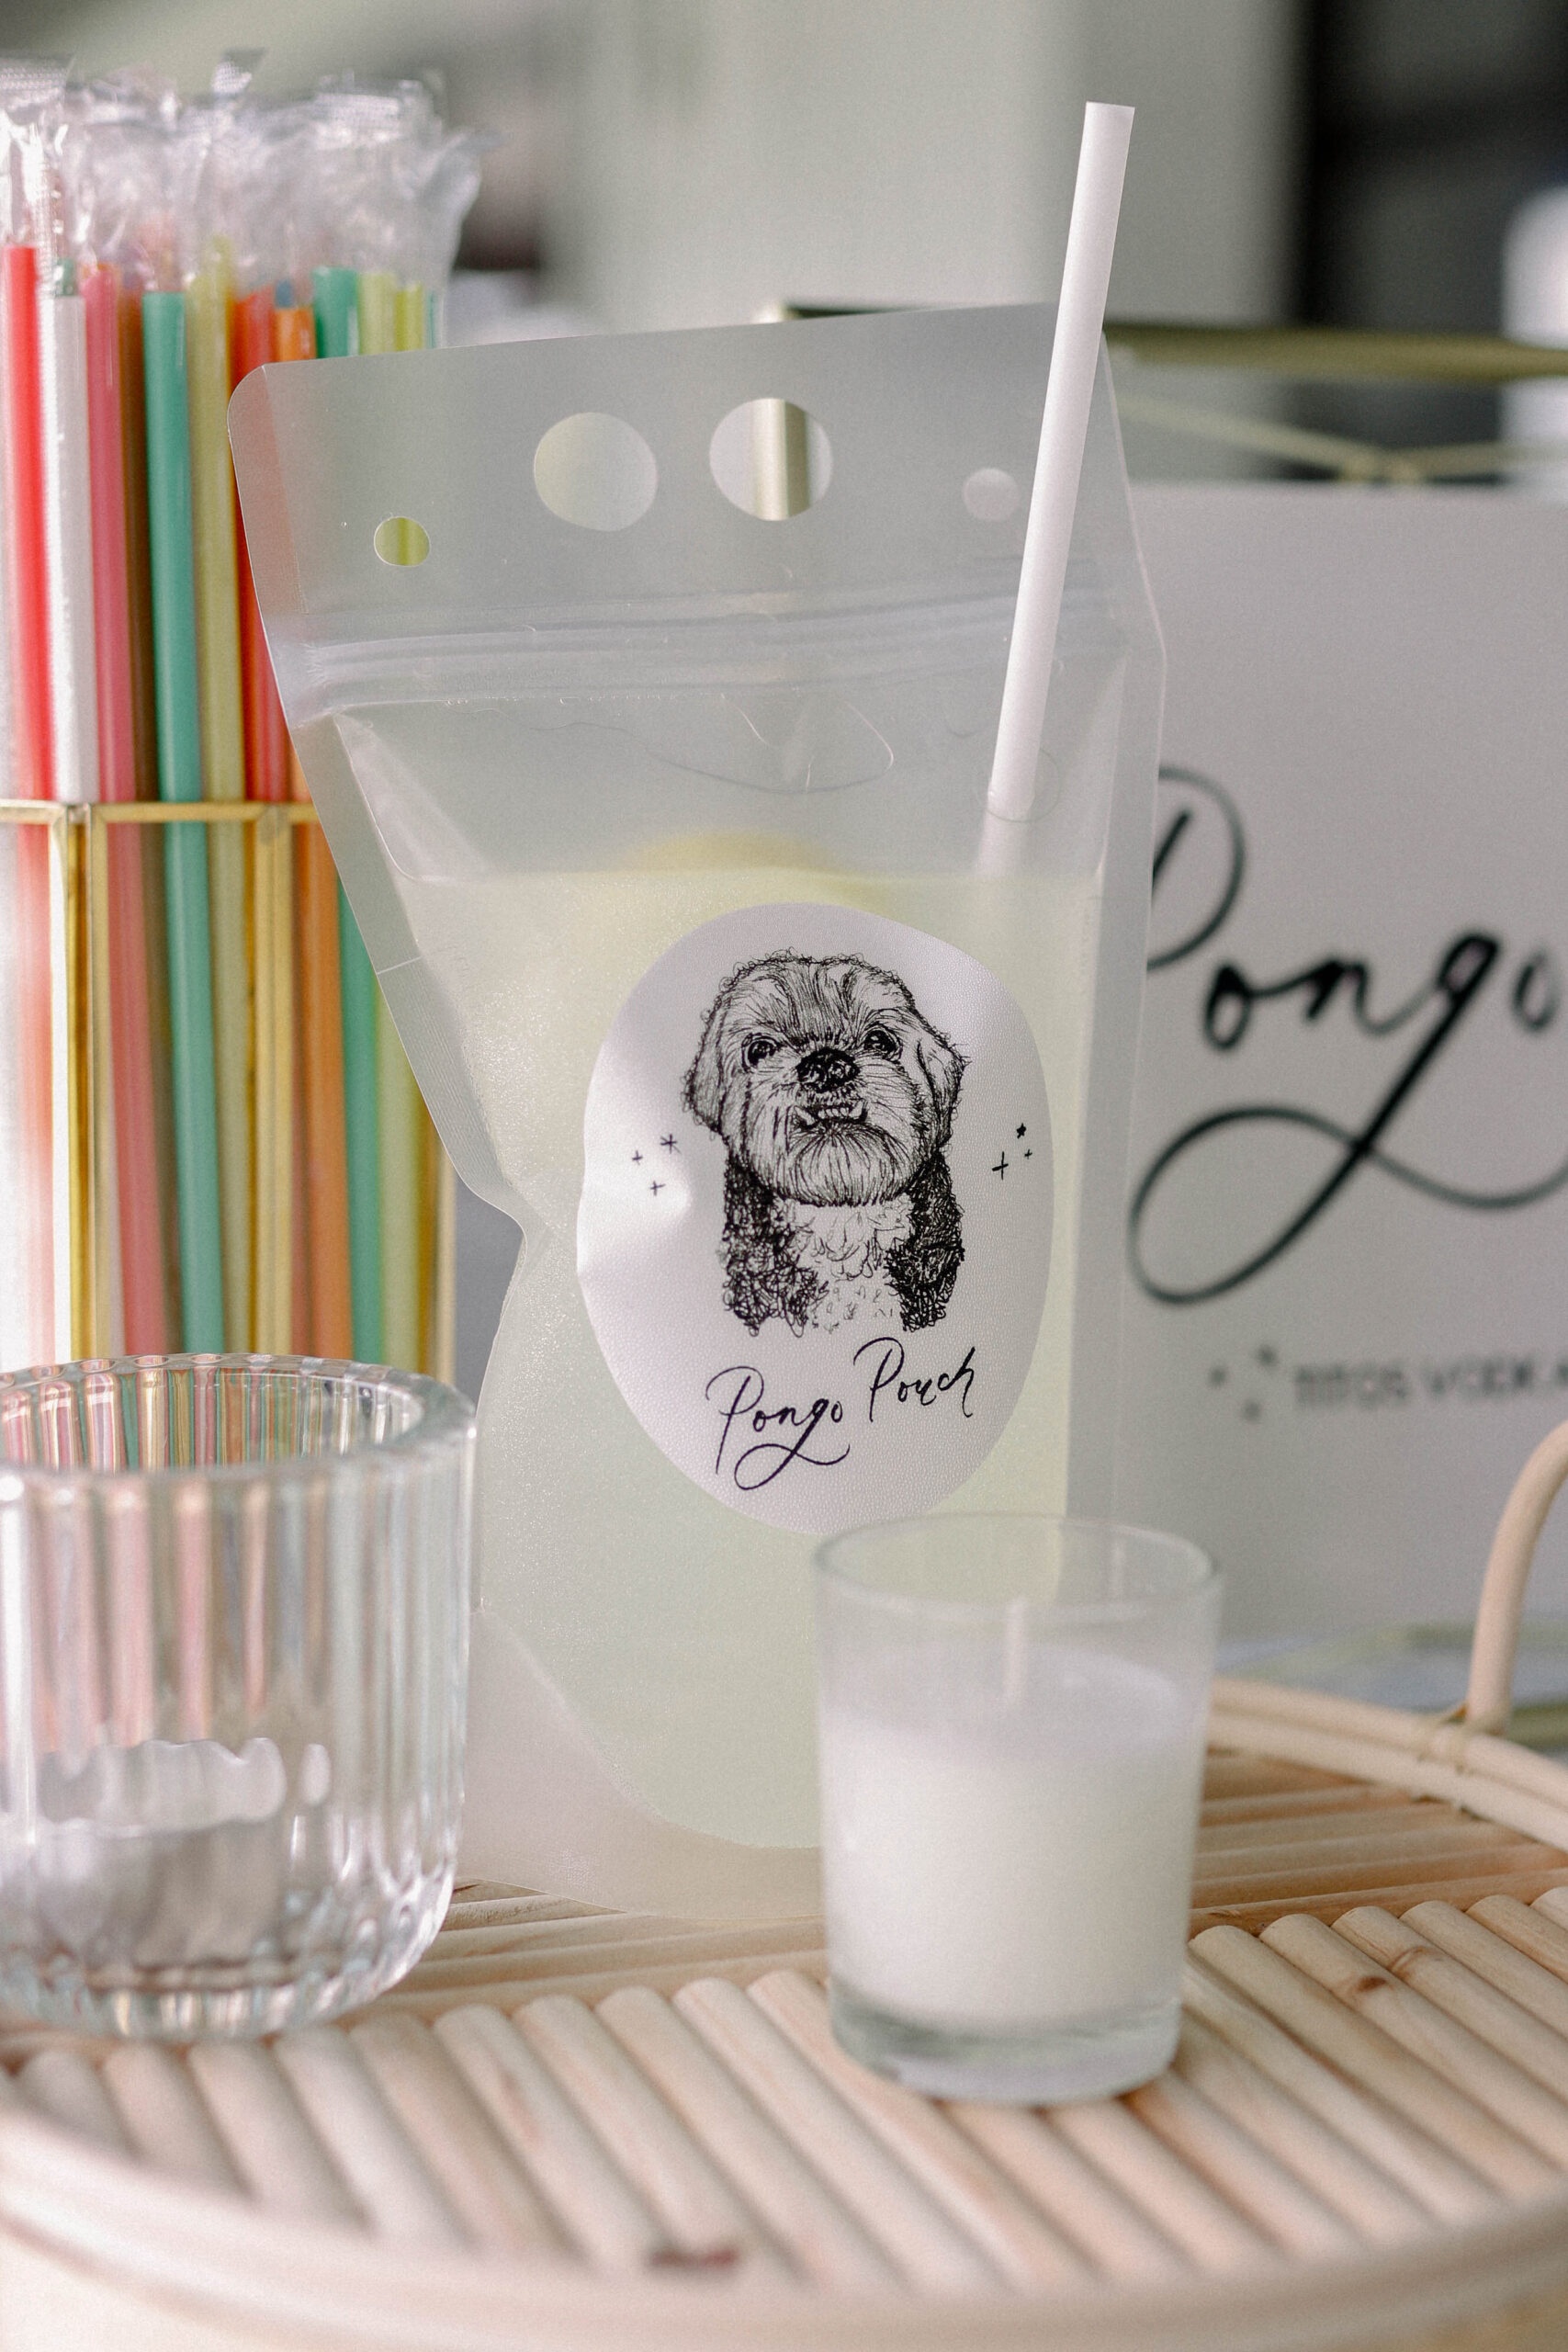 Drink pouches customized with pet illustrations